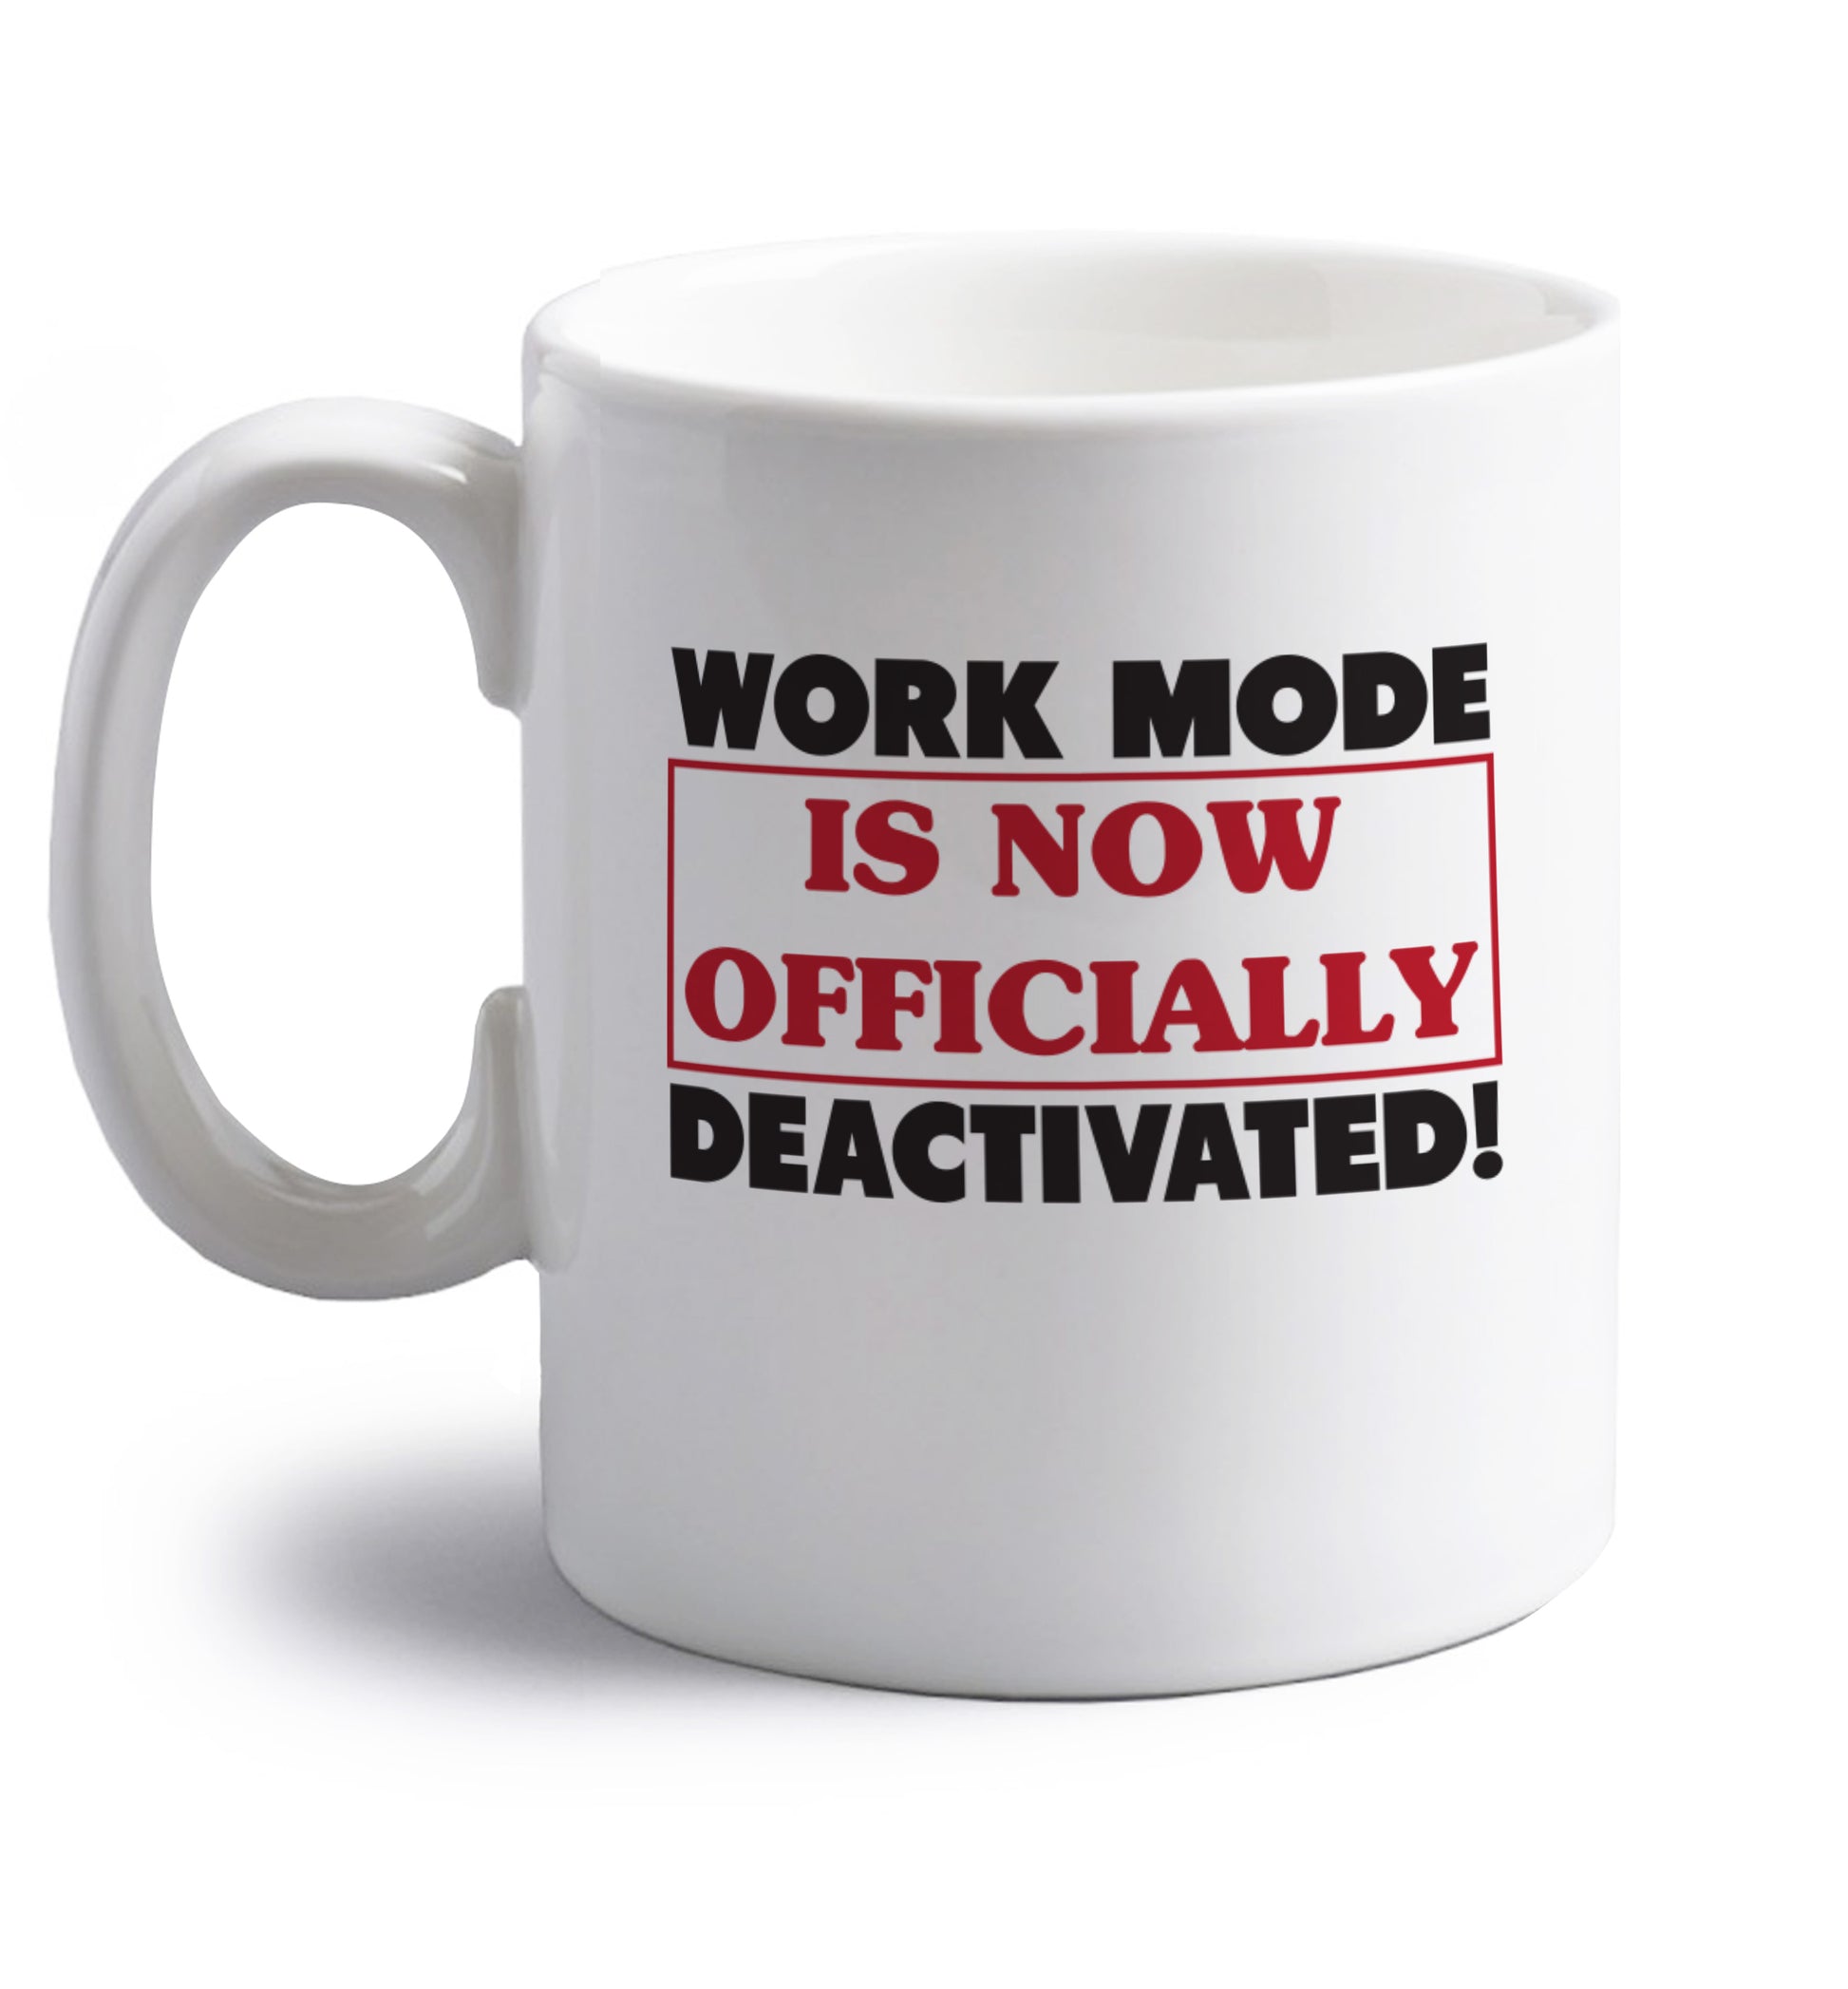 Work mode is now officially deactivated right handed white ceramic mug 